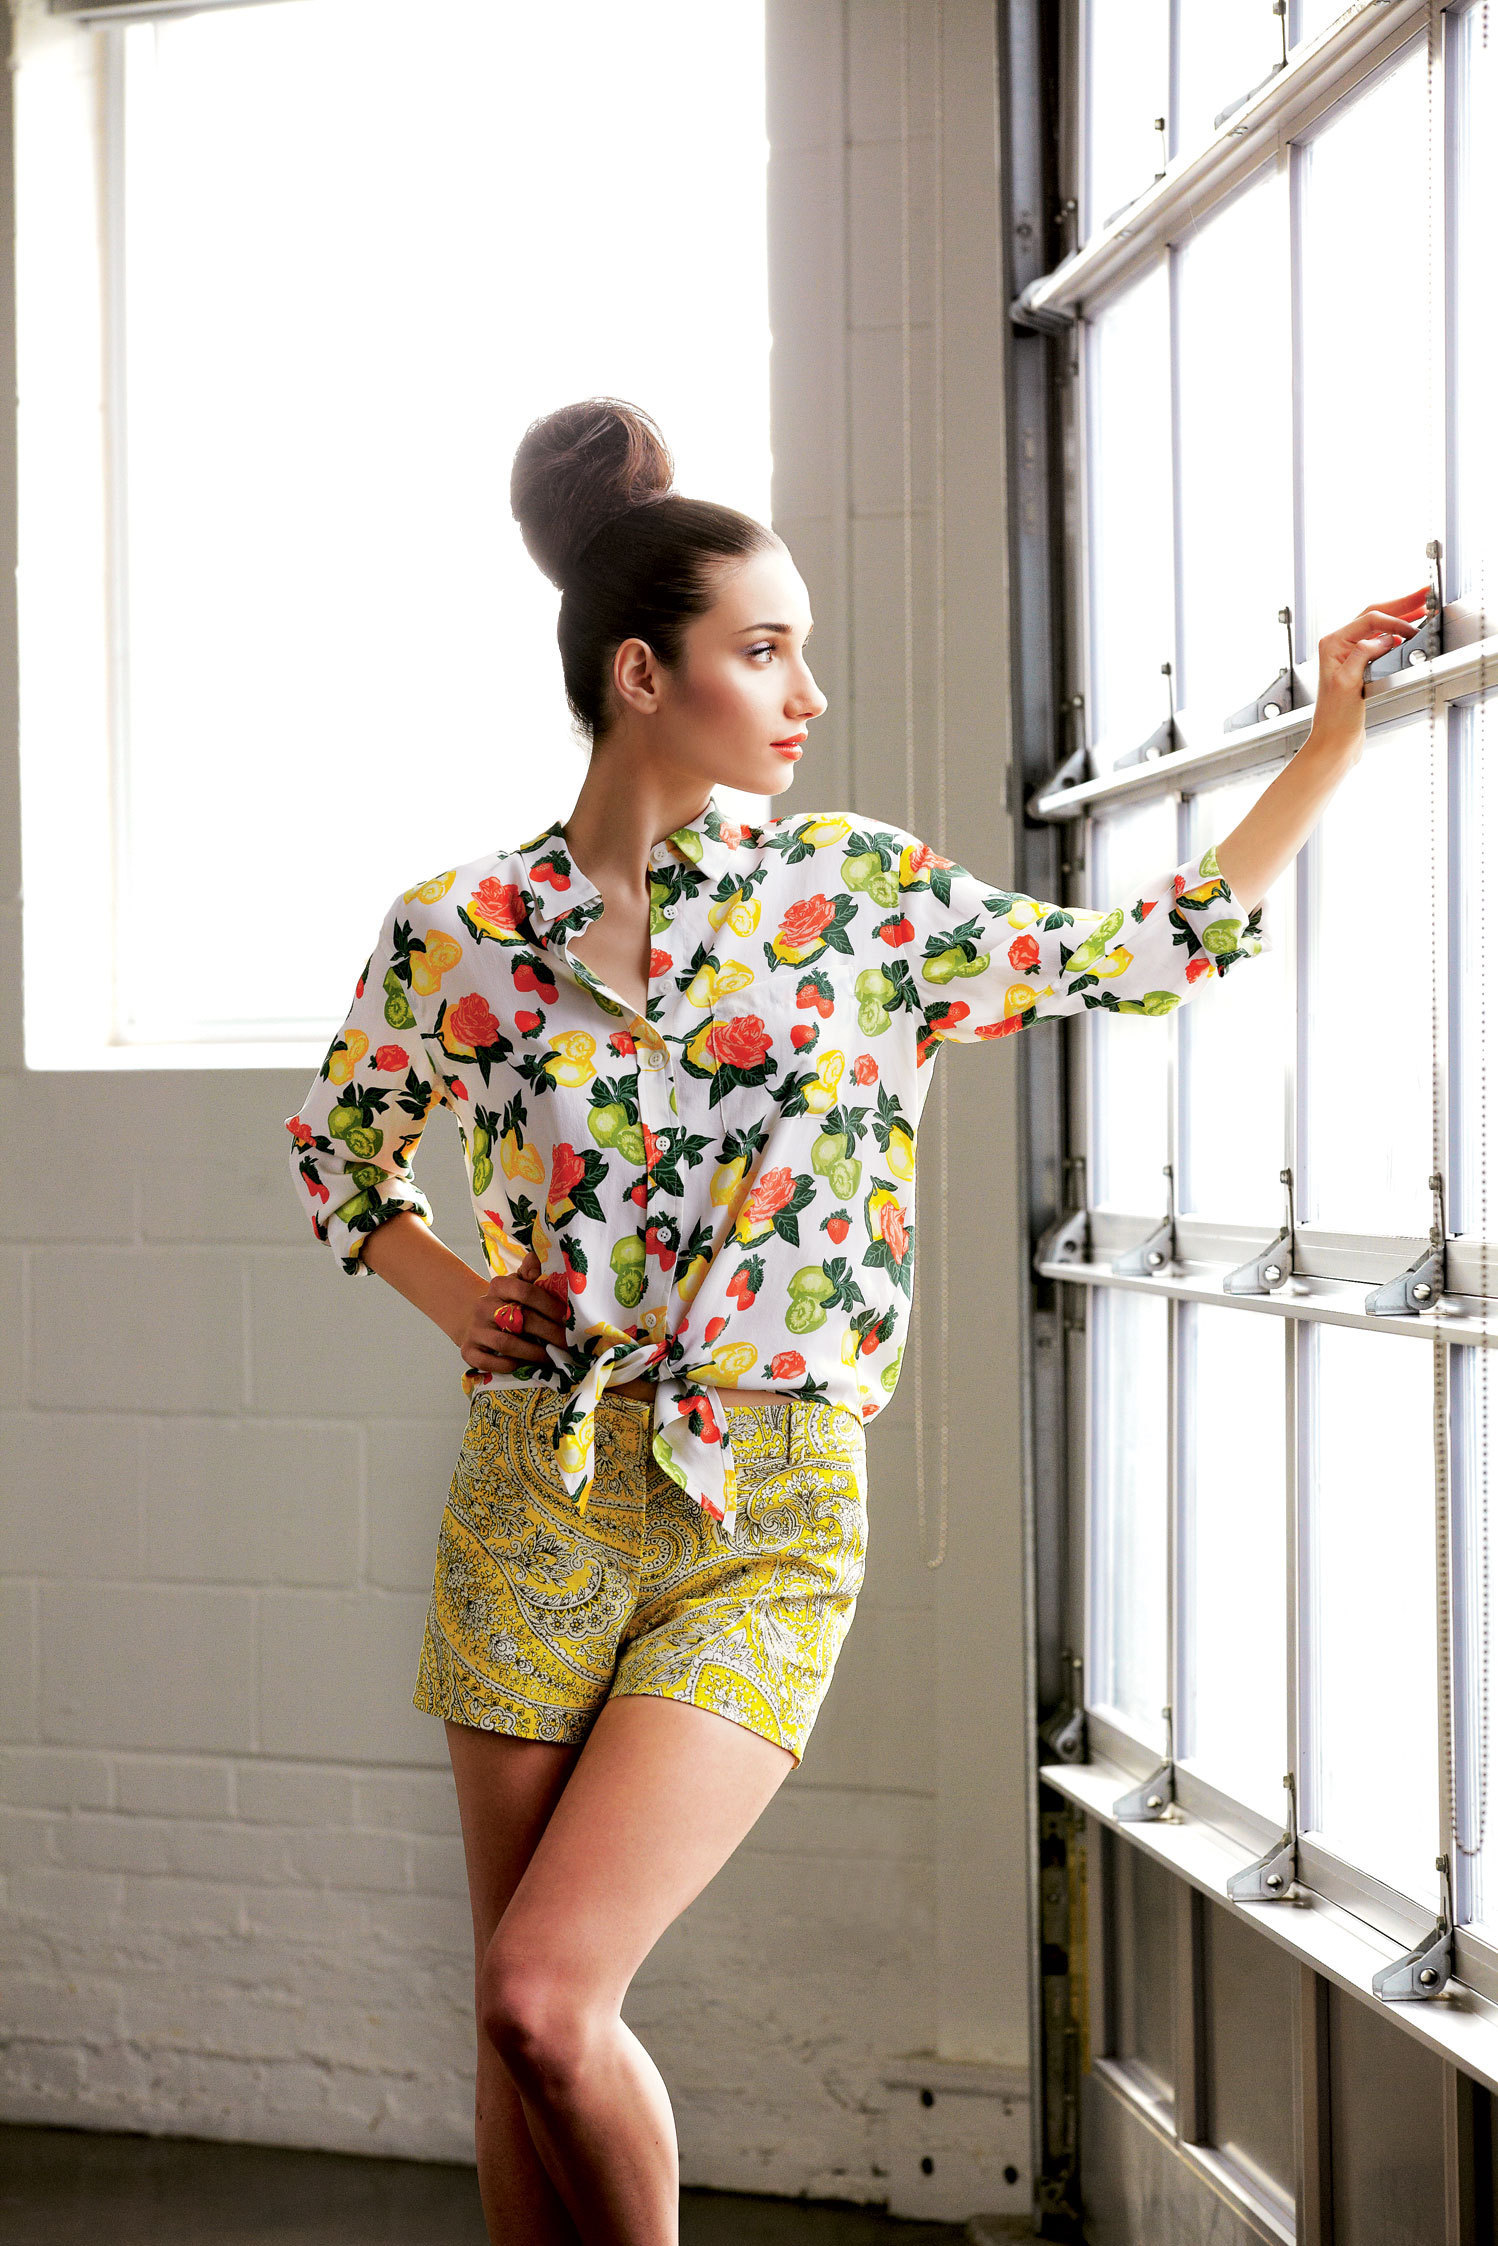 print on print fashion style trend, floral shirt  from Simms Sigal, and print shorts from J.Crew